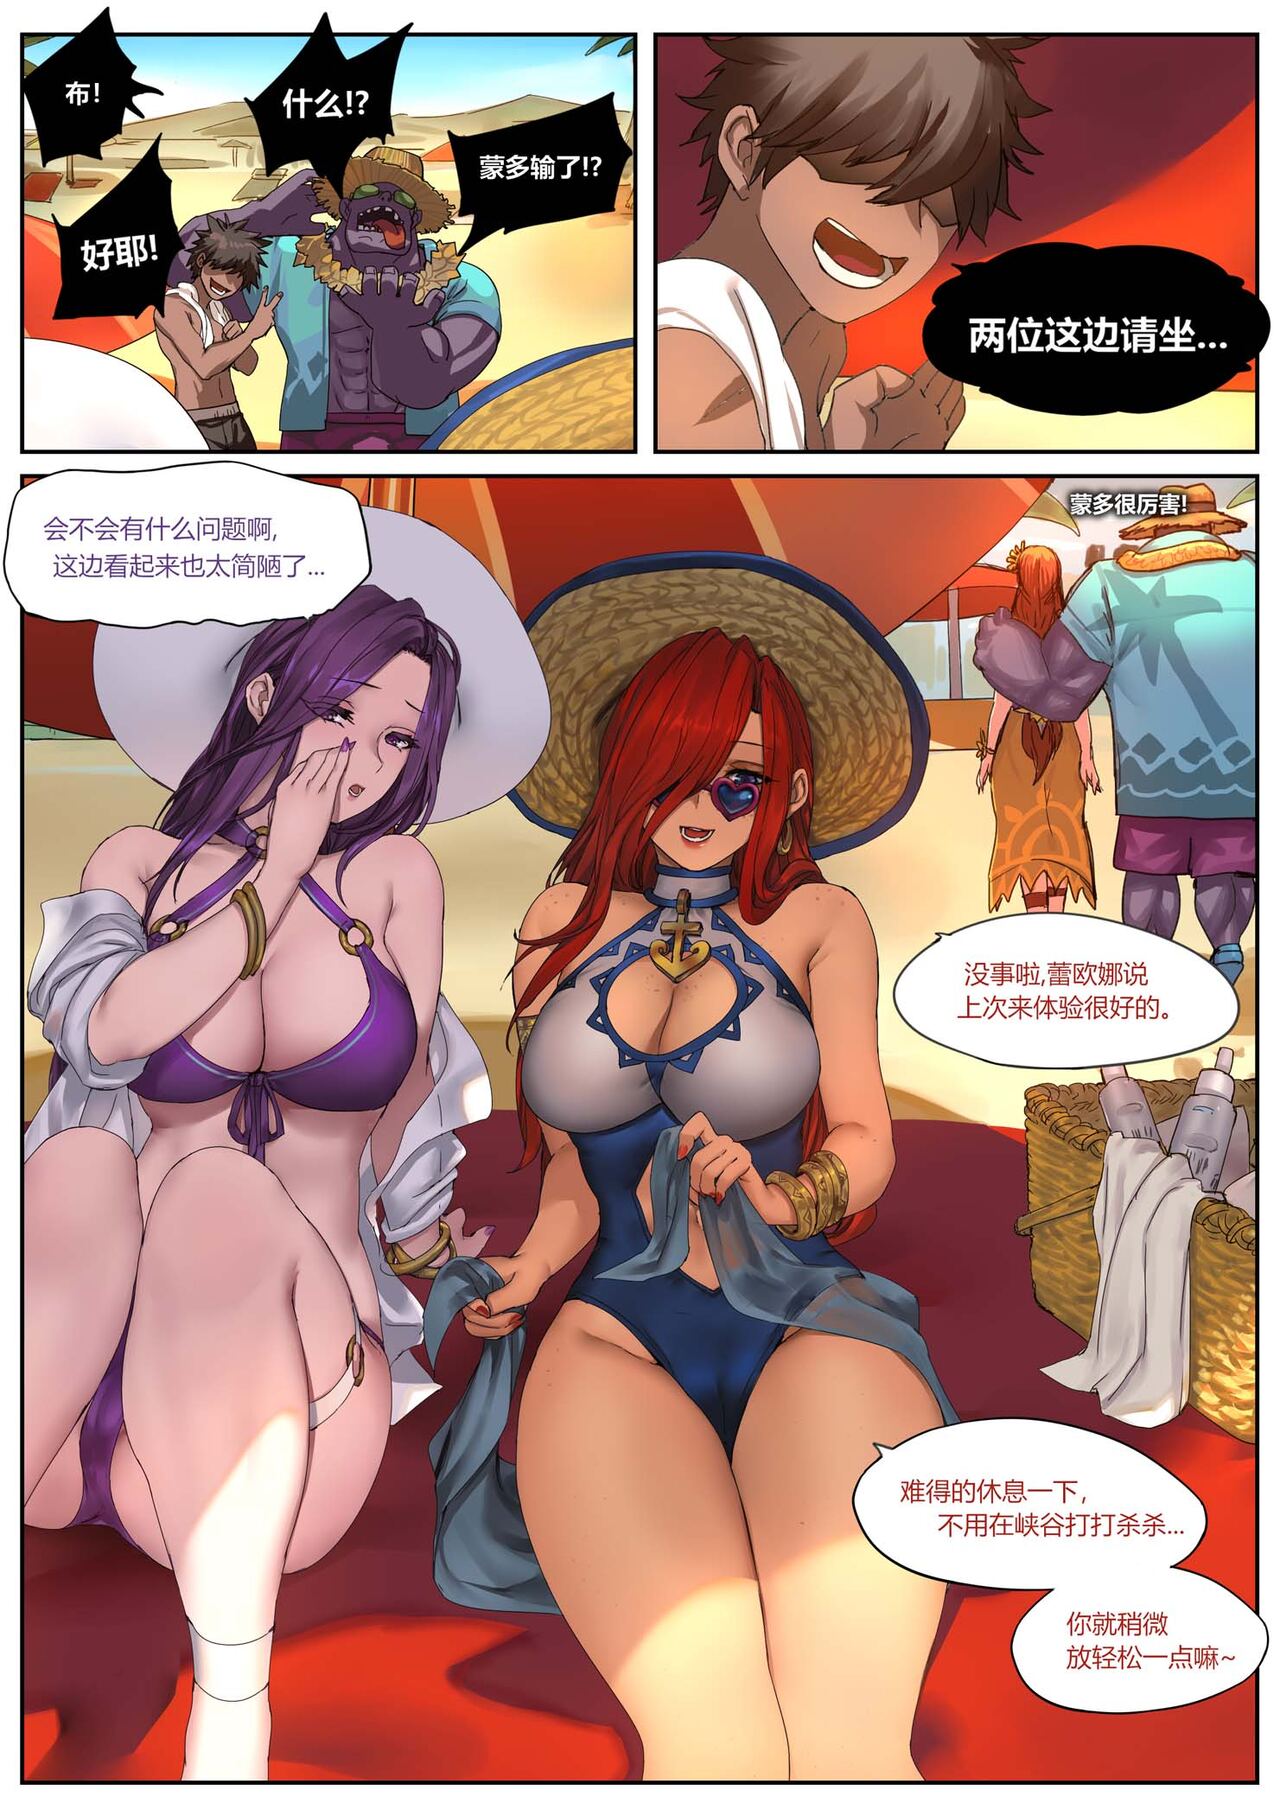 Pool Party - Summer in summoner's rift 2 (uncensored) 